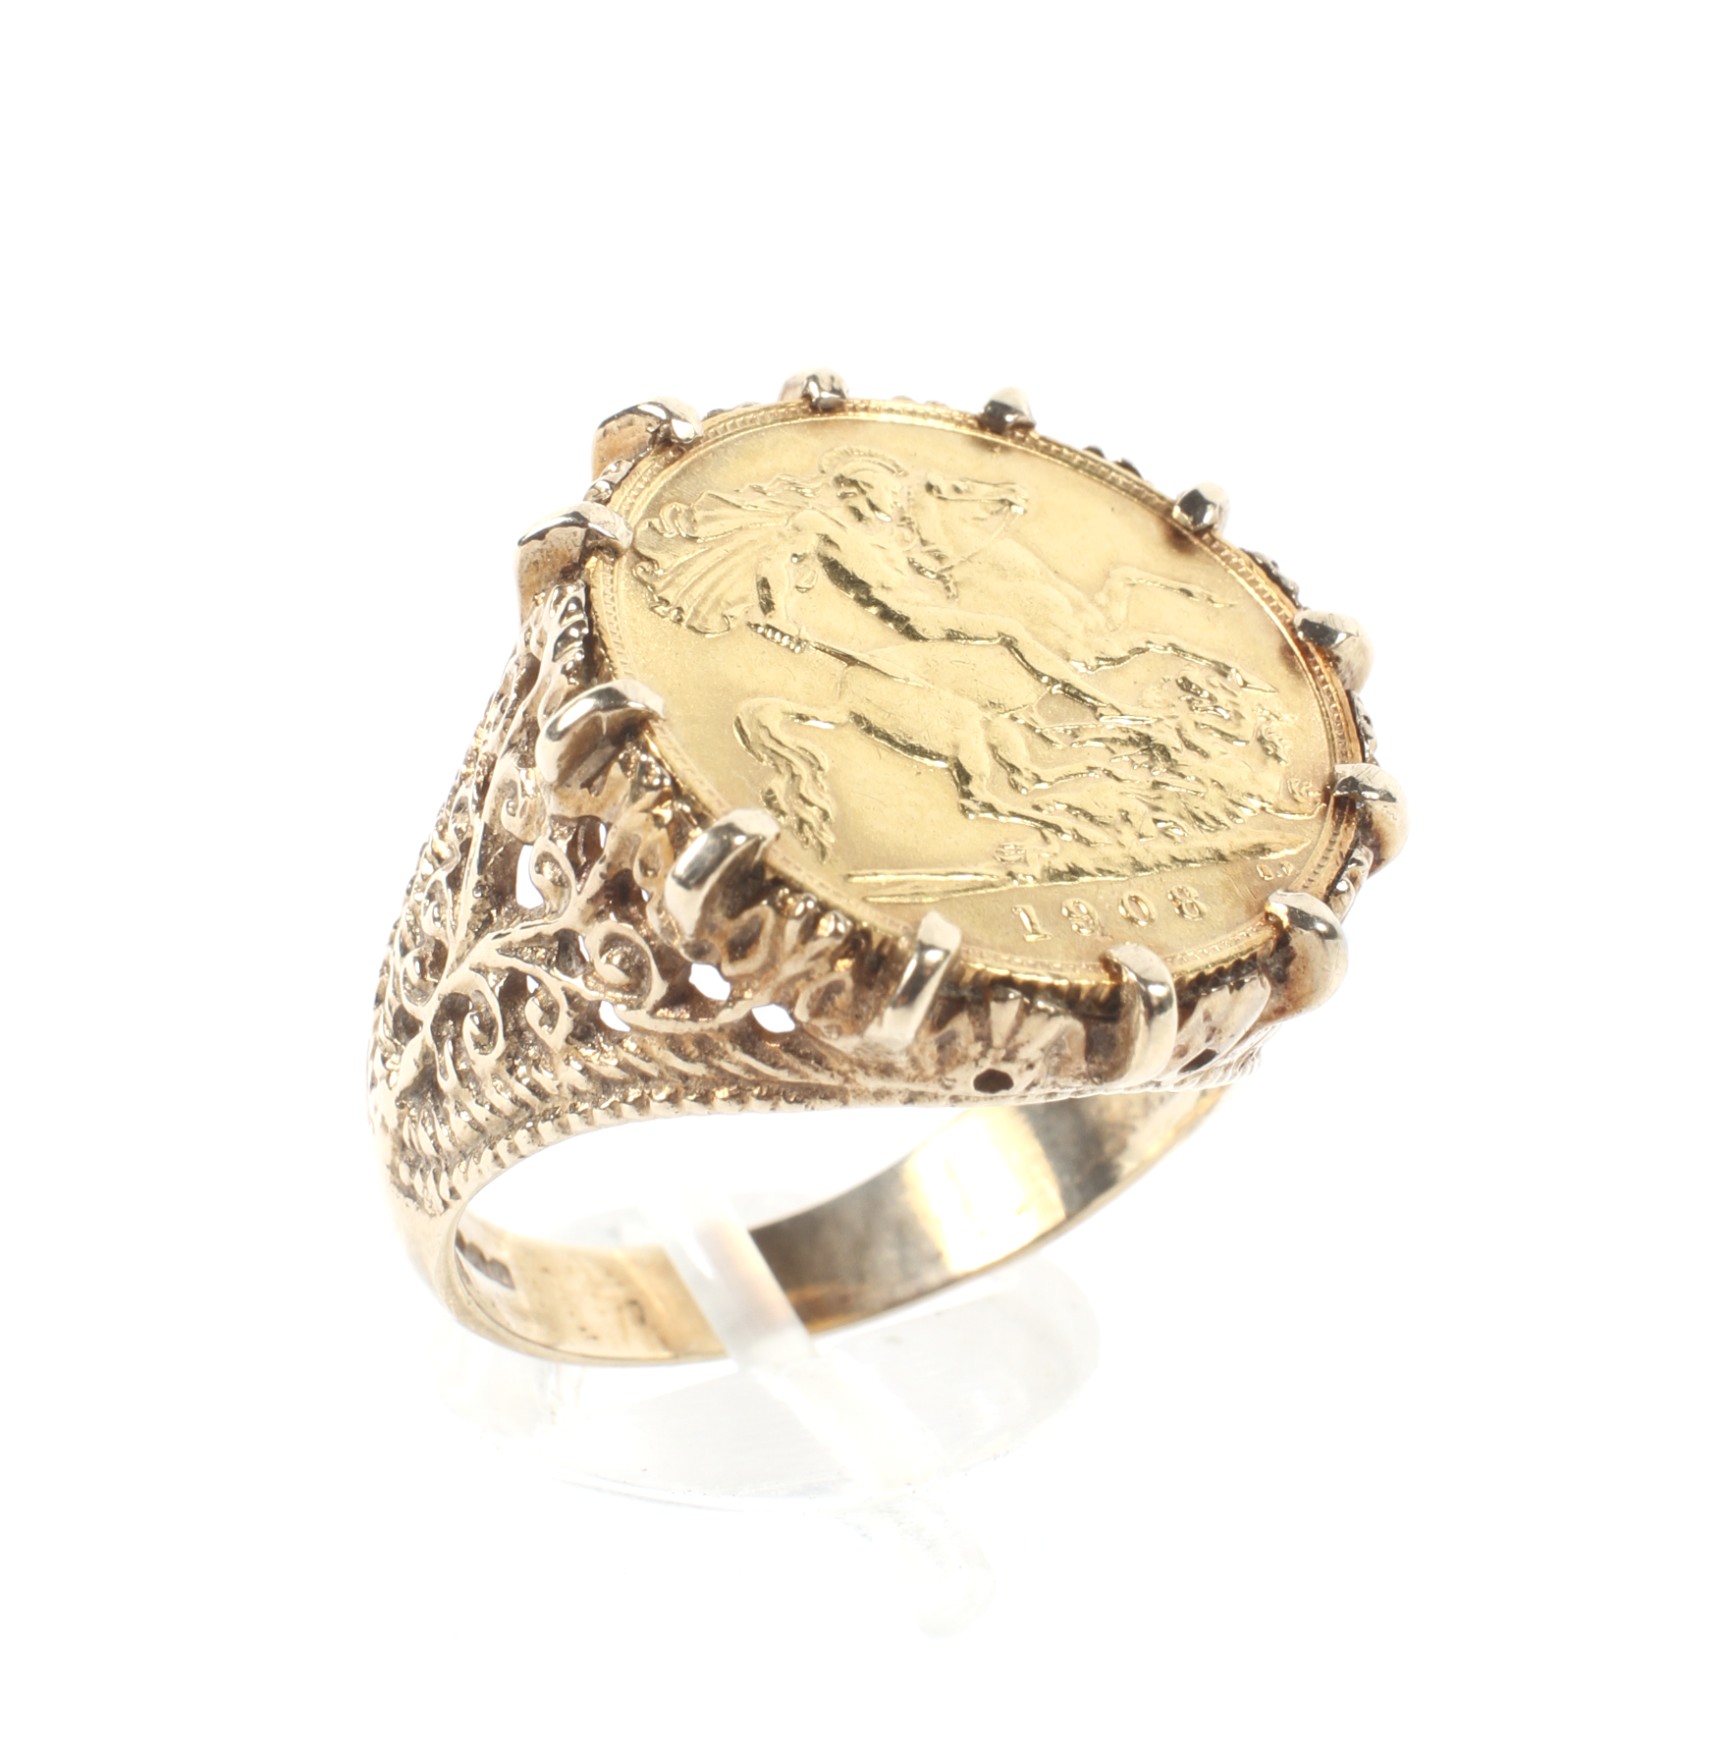 A 1908 Edward VII gold half sovereign ring, size T, 10g.